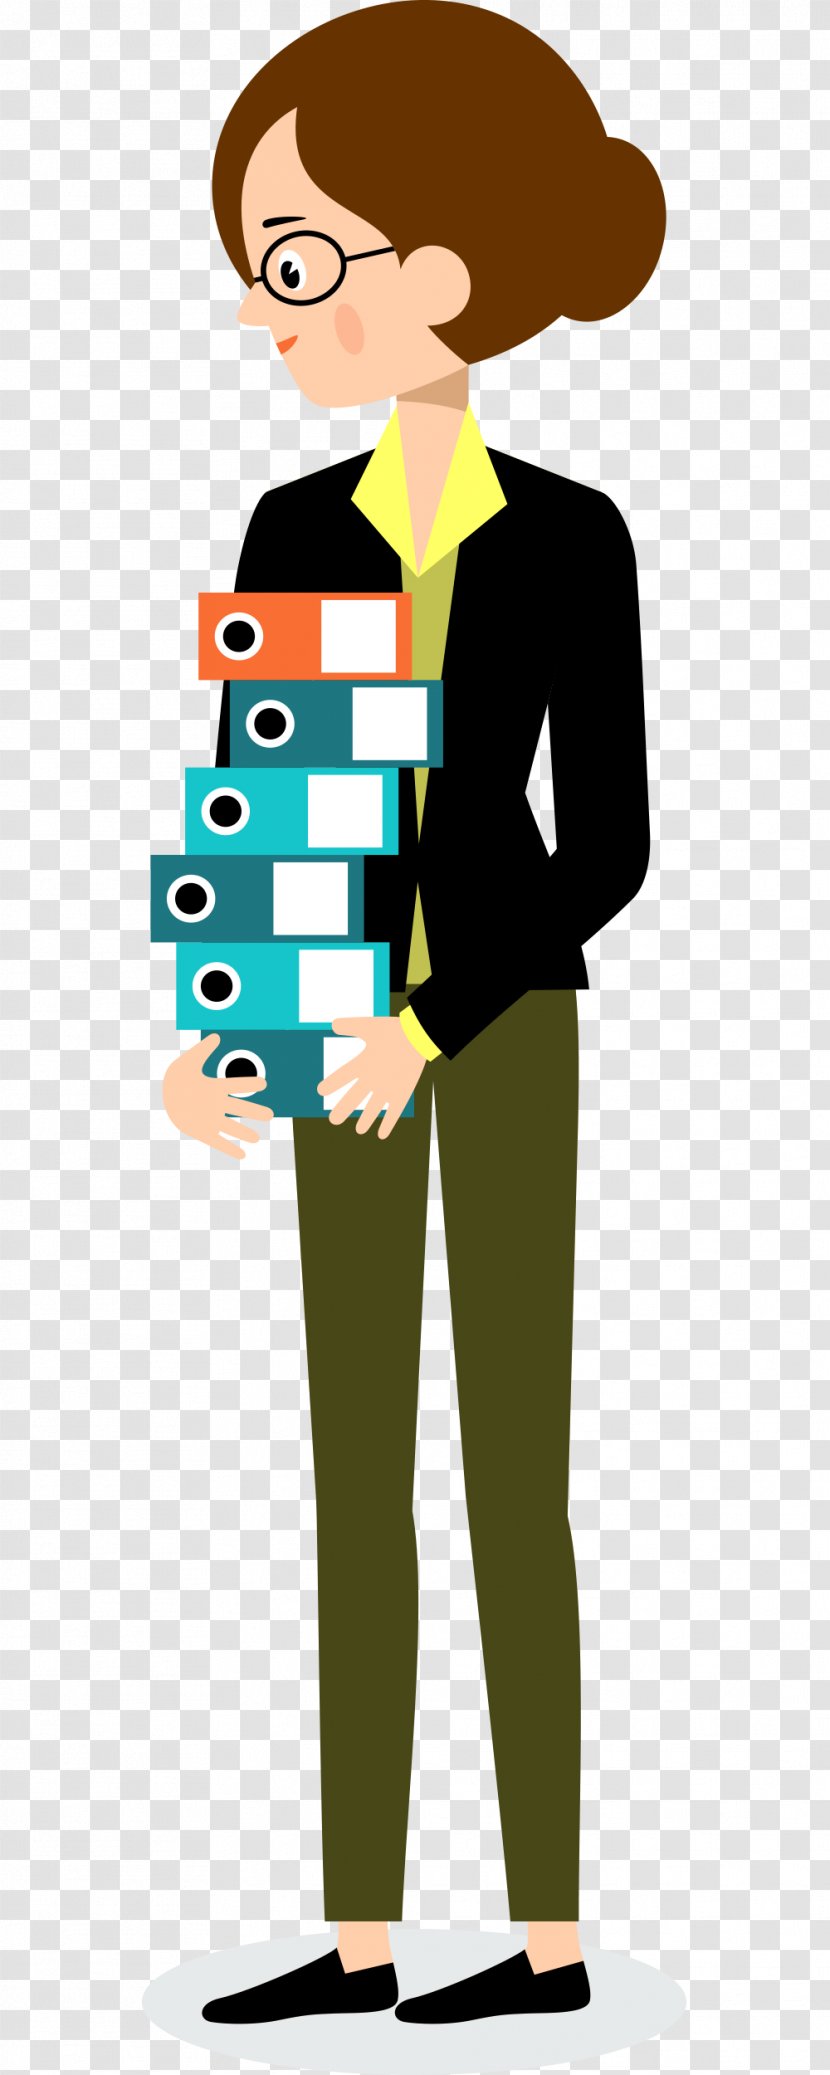 Cartoon Illustration - Communication - Holding A Stack Of Business Women Transparent PNG